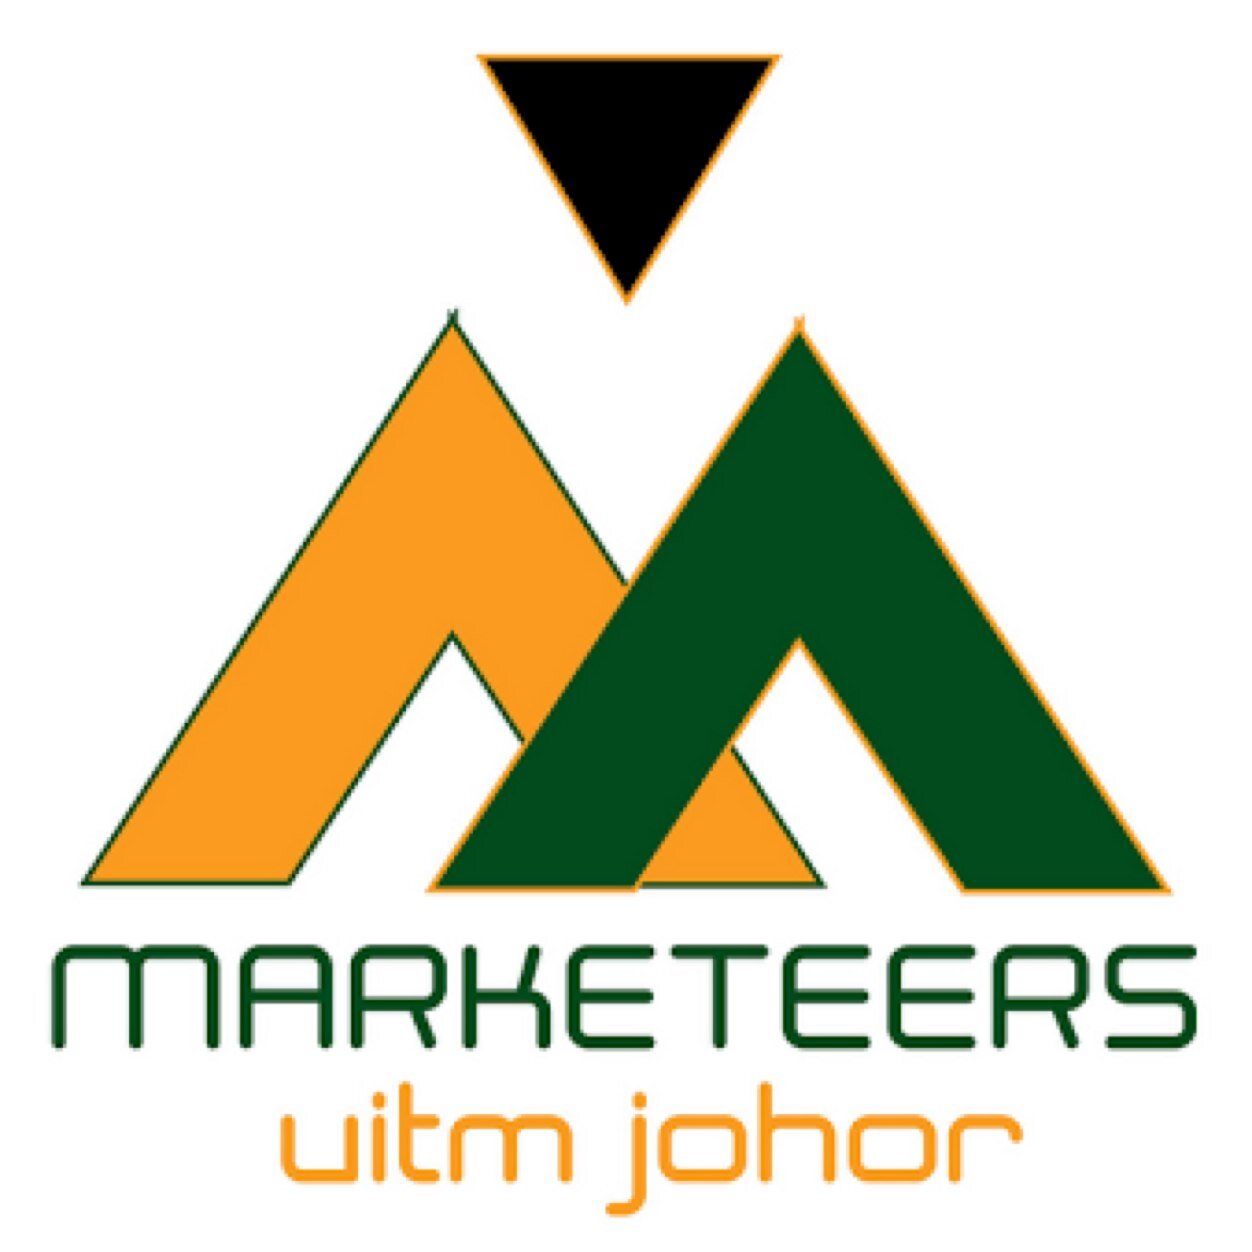 THE OFFICIAL TWITTER ACCOUNT OF BUSINESS ADMINISTRATION MARKETING STUDENT Stay tuned for latest update ✨ #marketeersuitmjohor